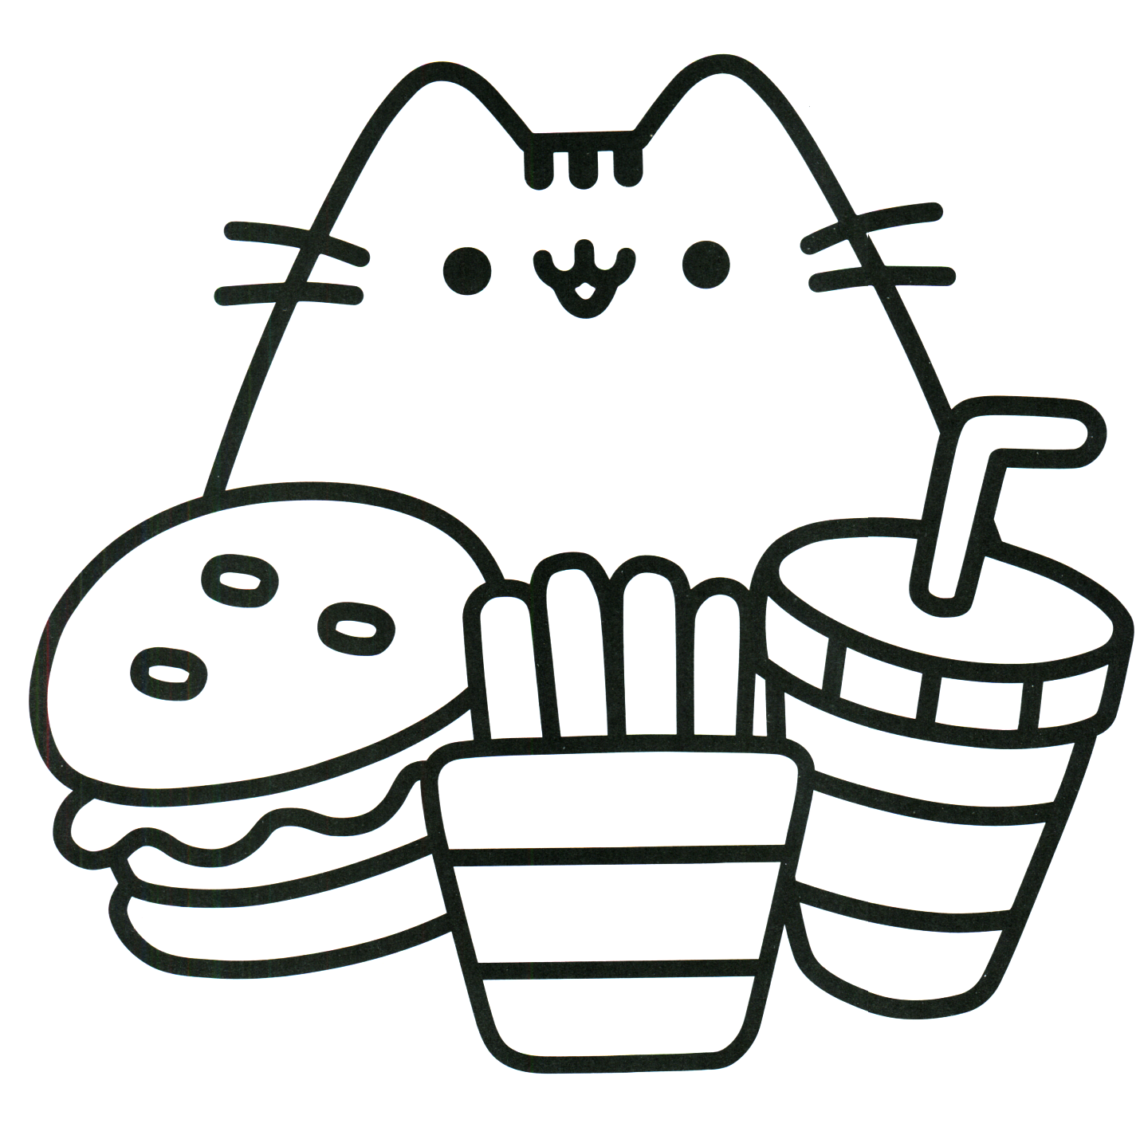 27 Pusheen Coloring Pages For Kids - Visual Arts Ideas